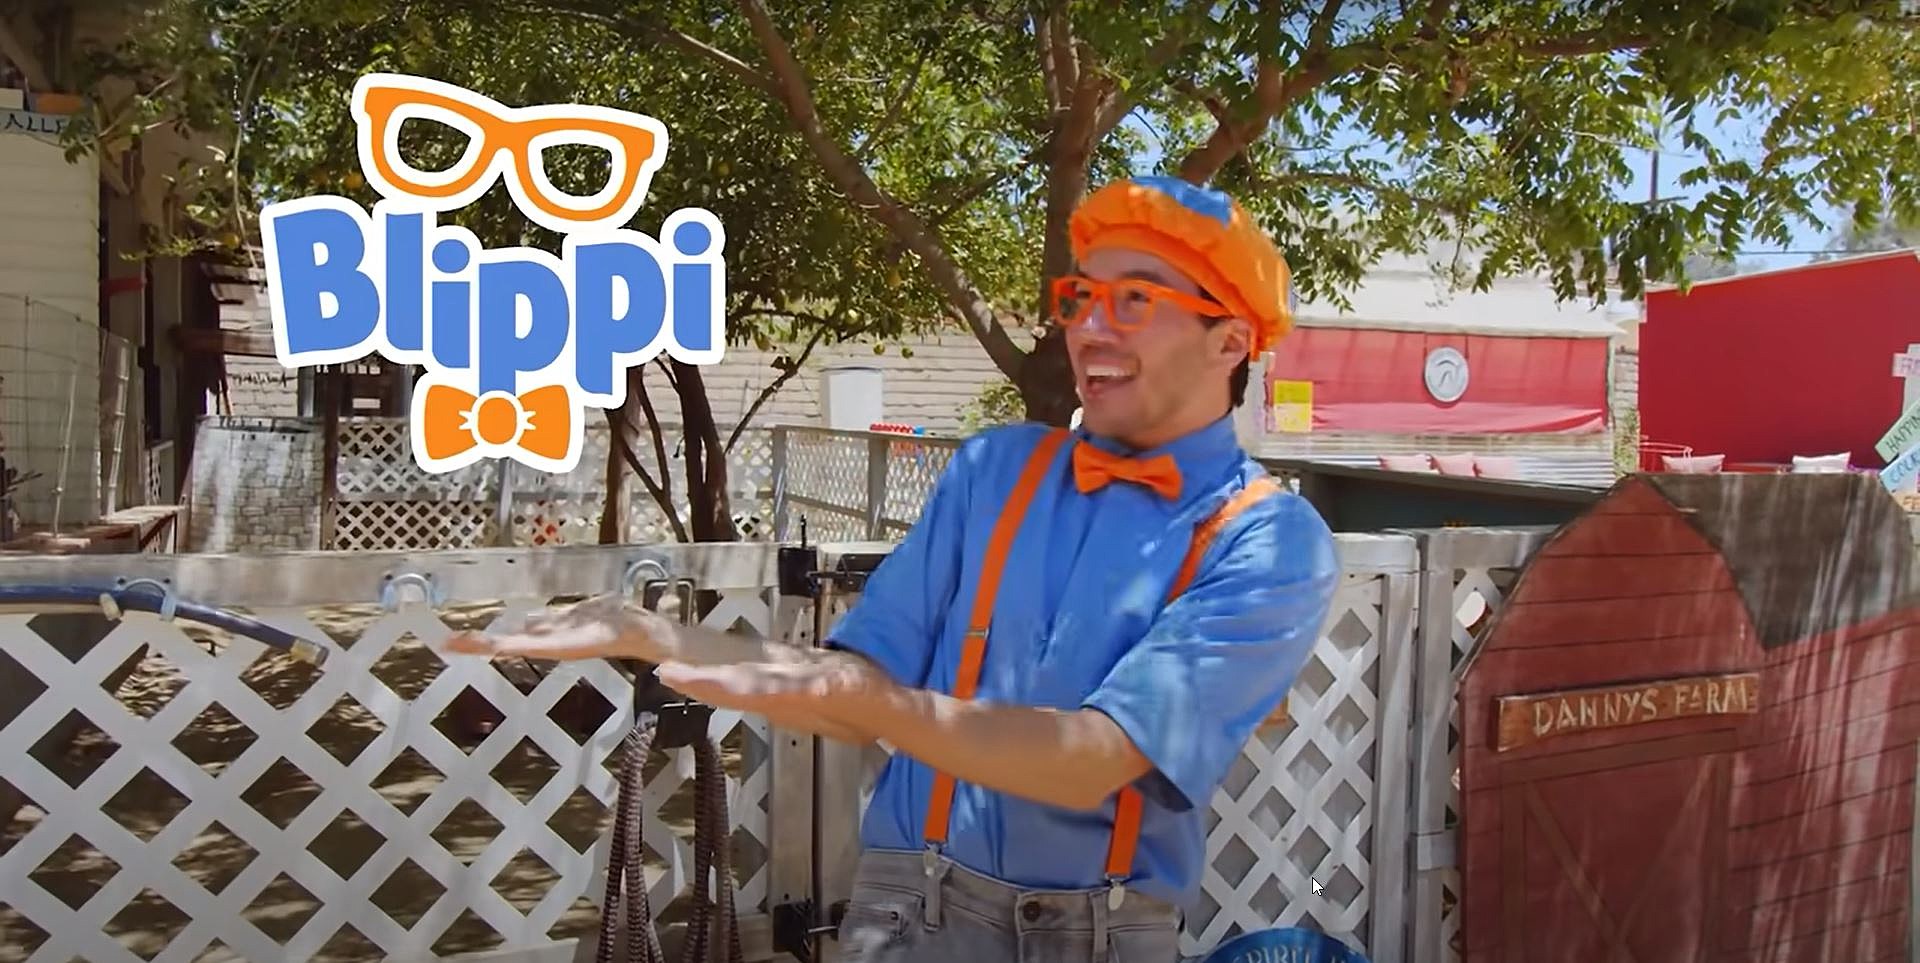 Blippi The Musical Announces 2022 Tour Stop in Evansville